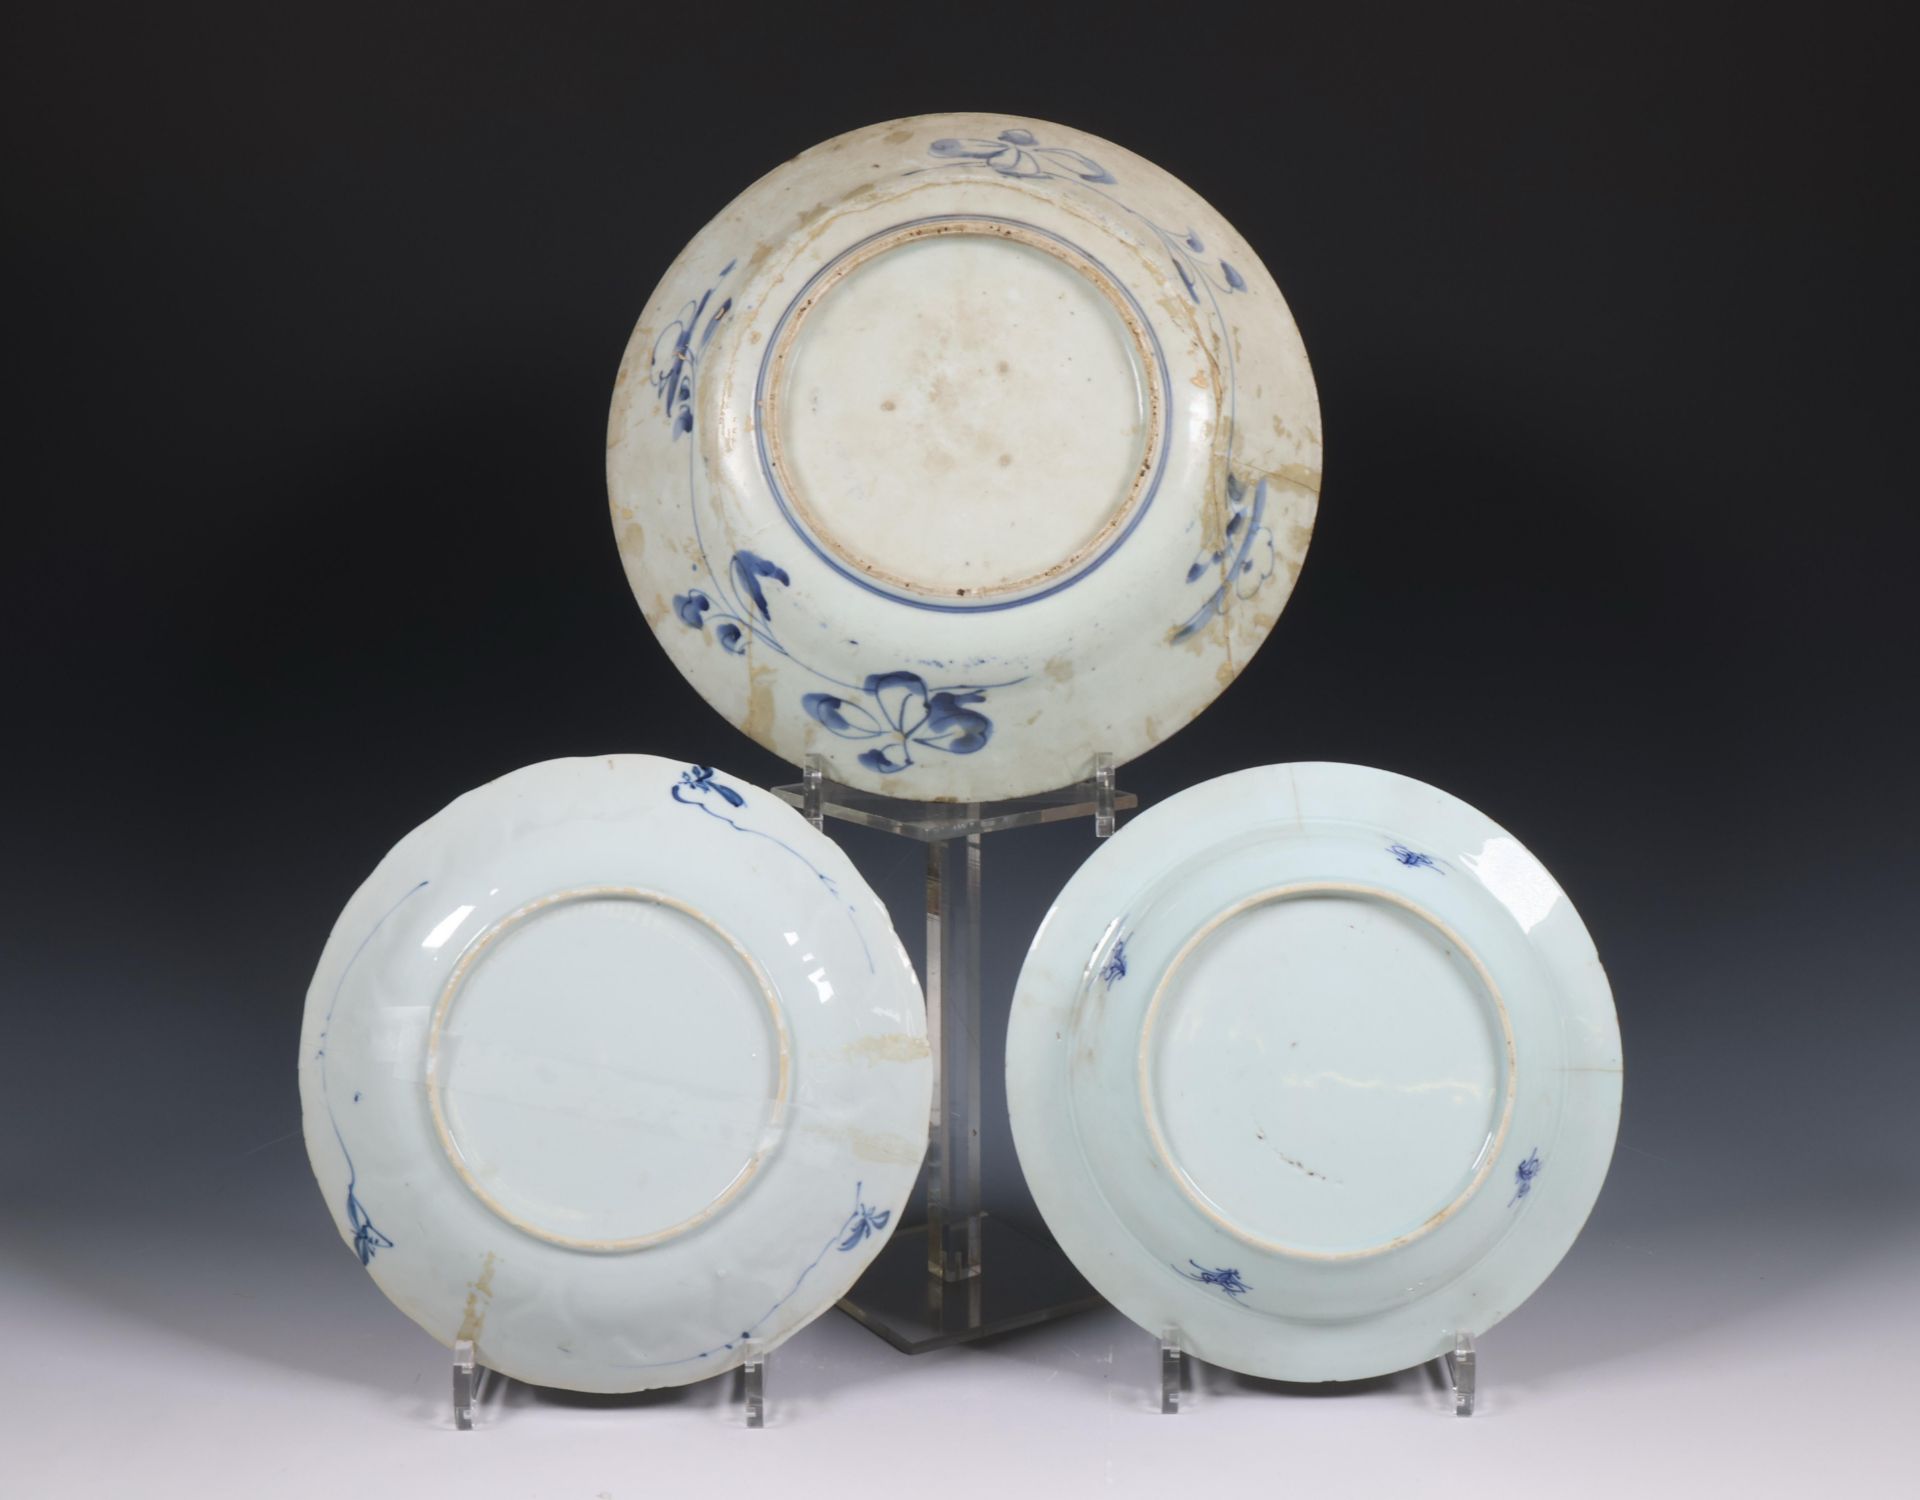 China and Japan, collection of various porcelain plates, 17th century and later, - Image 2 of 4